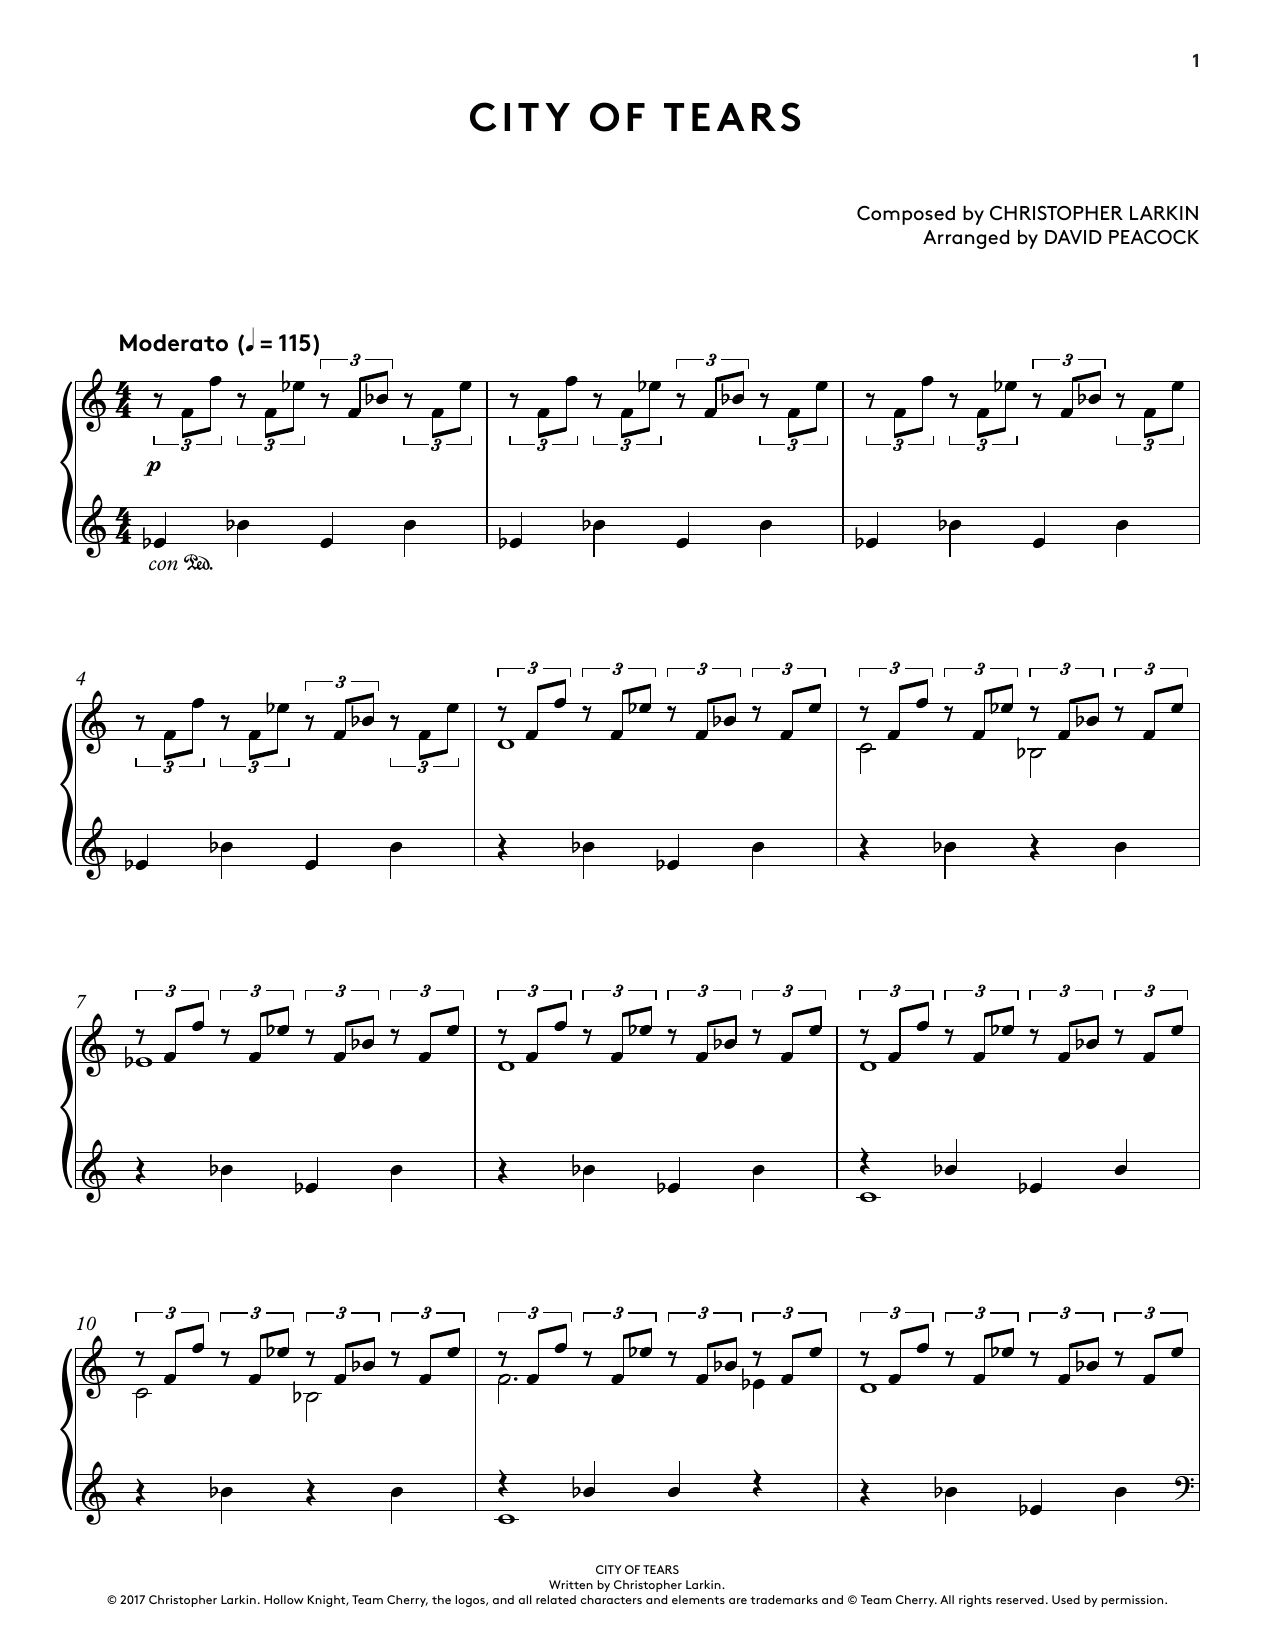 Download Christopher Larkin City of Tears (from Hollow Knight Piano Sheet Music